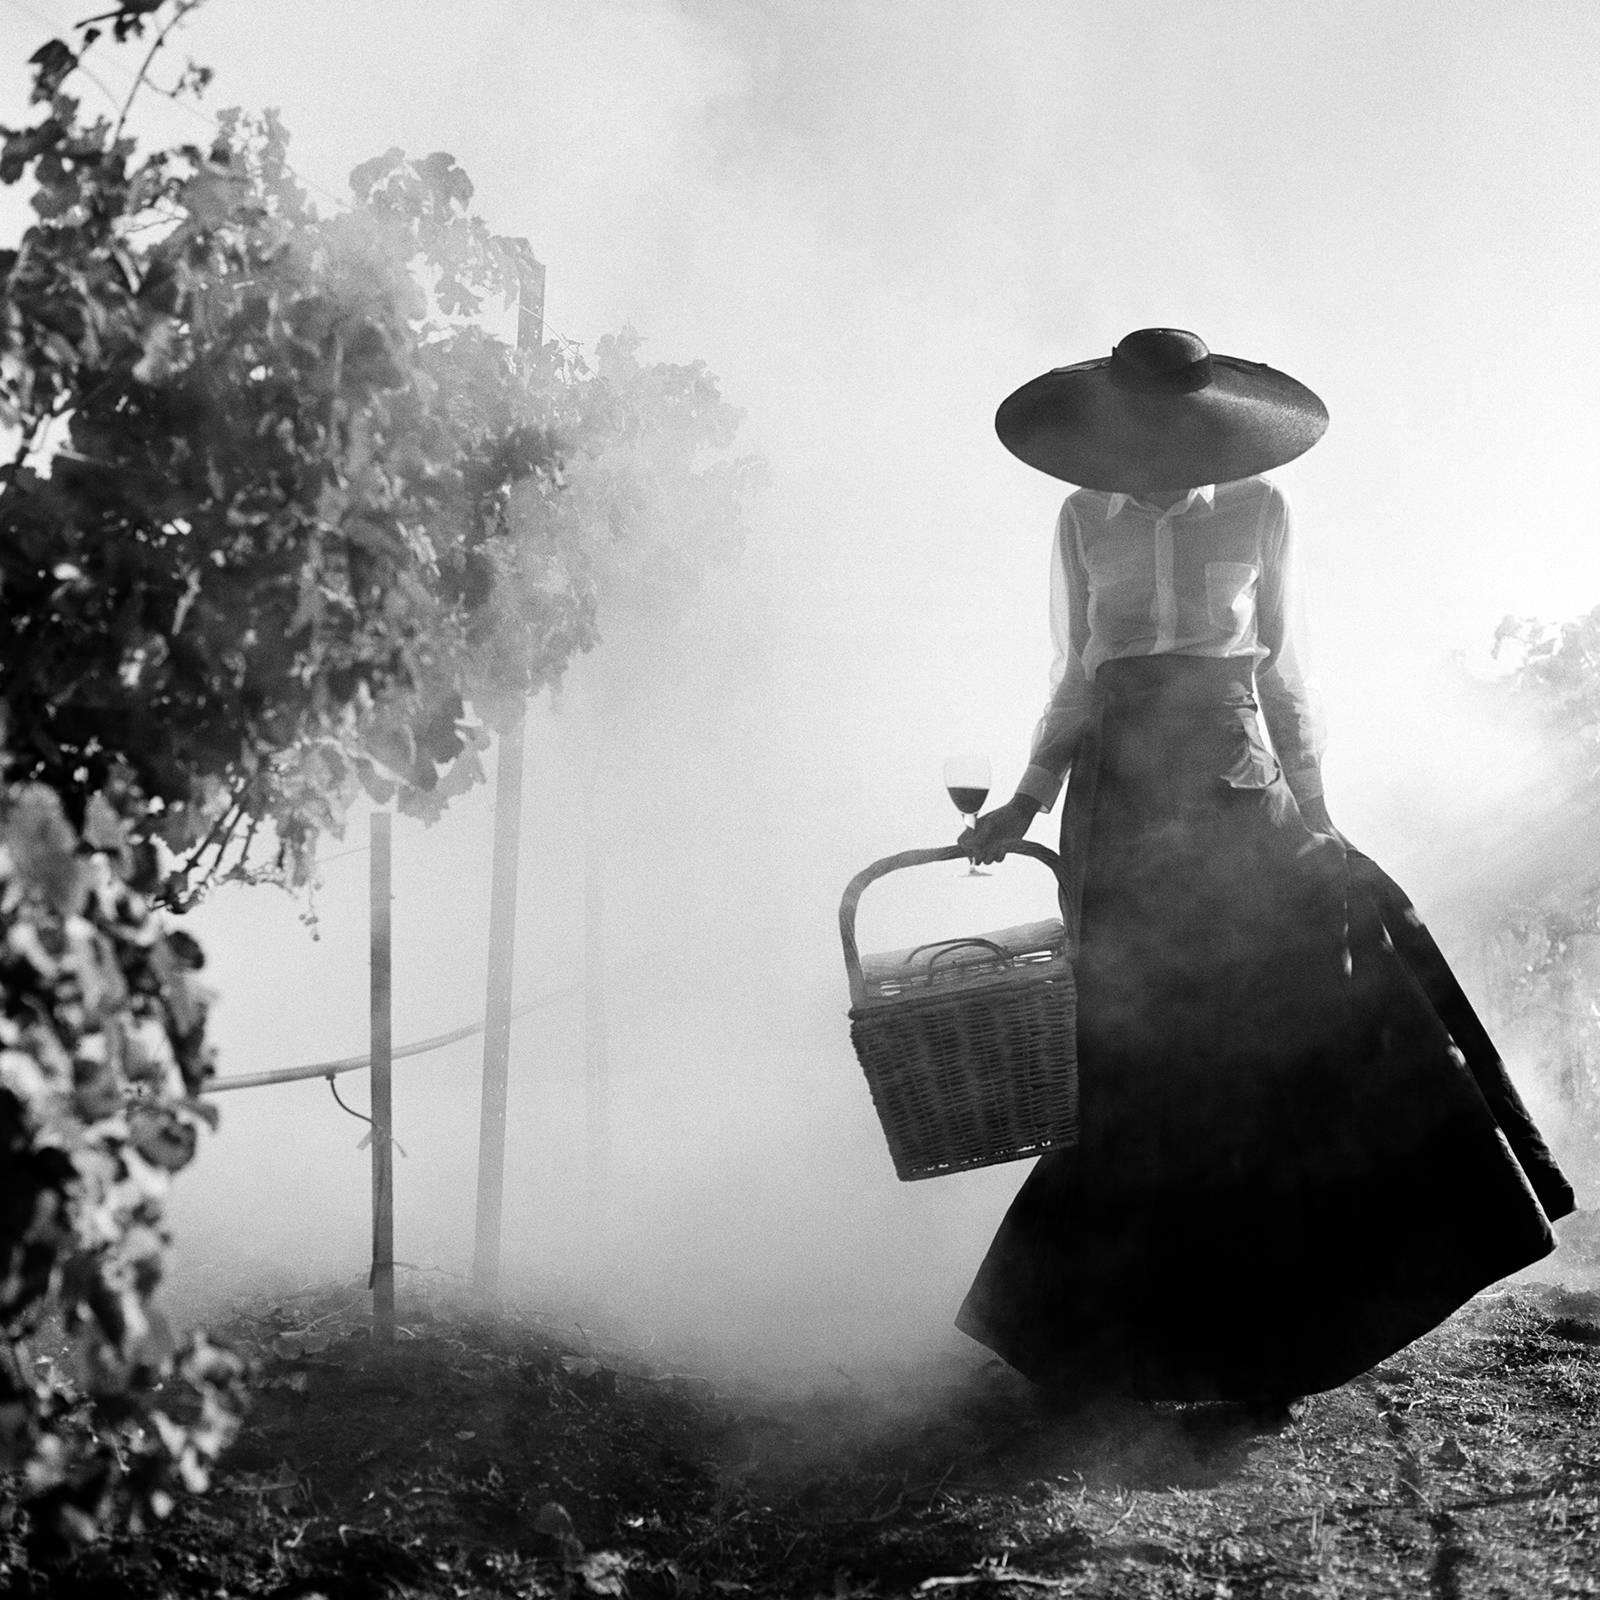 Rodney Smith Black and White Photograph - Woman Holding Dress Walking through Vineyard- Black and white 40 x 40 inch photo